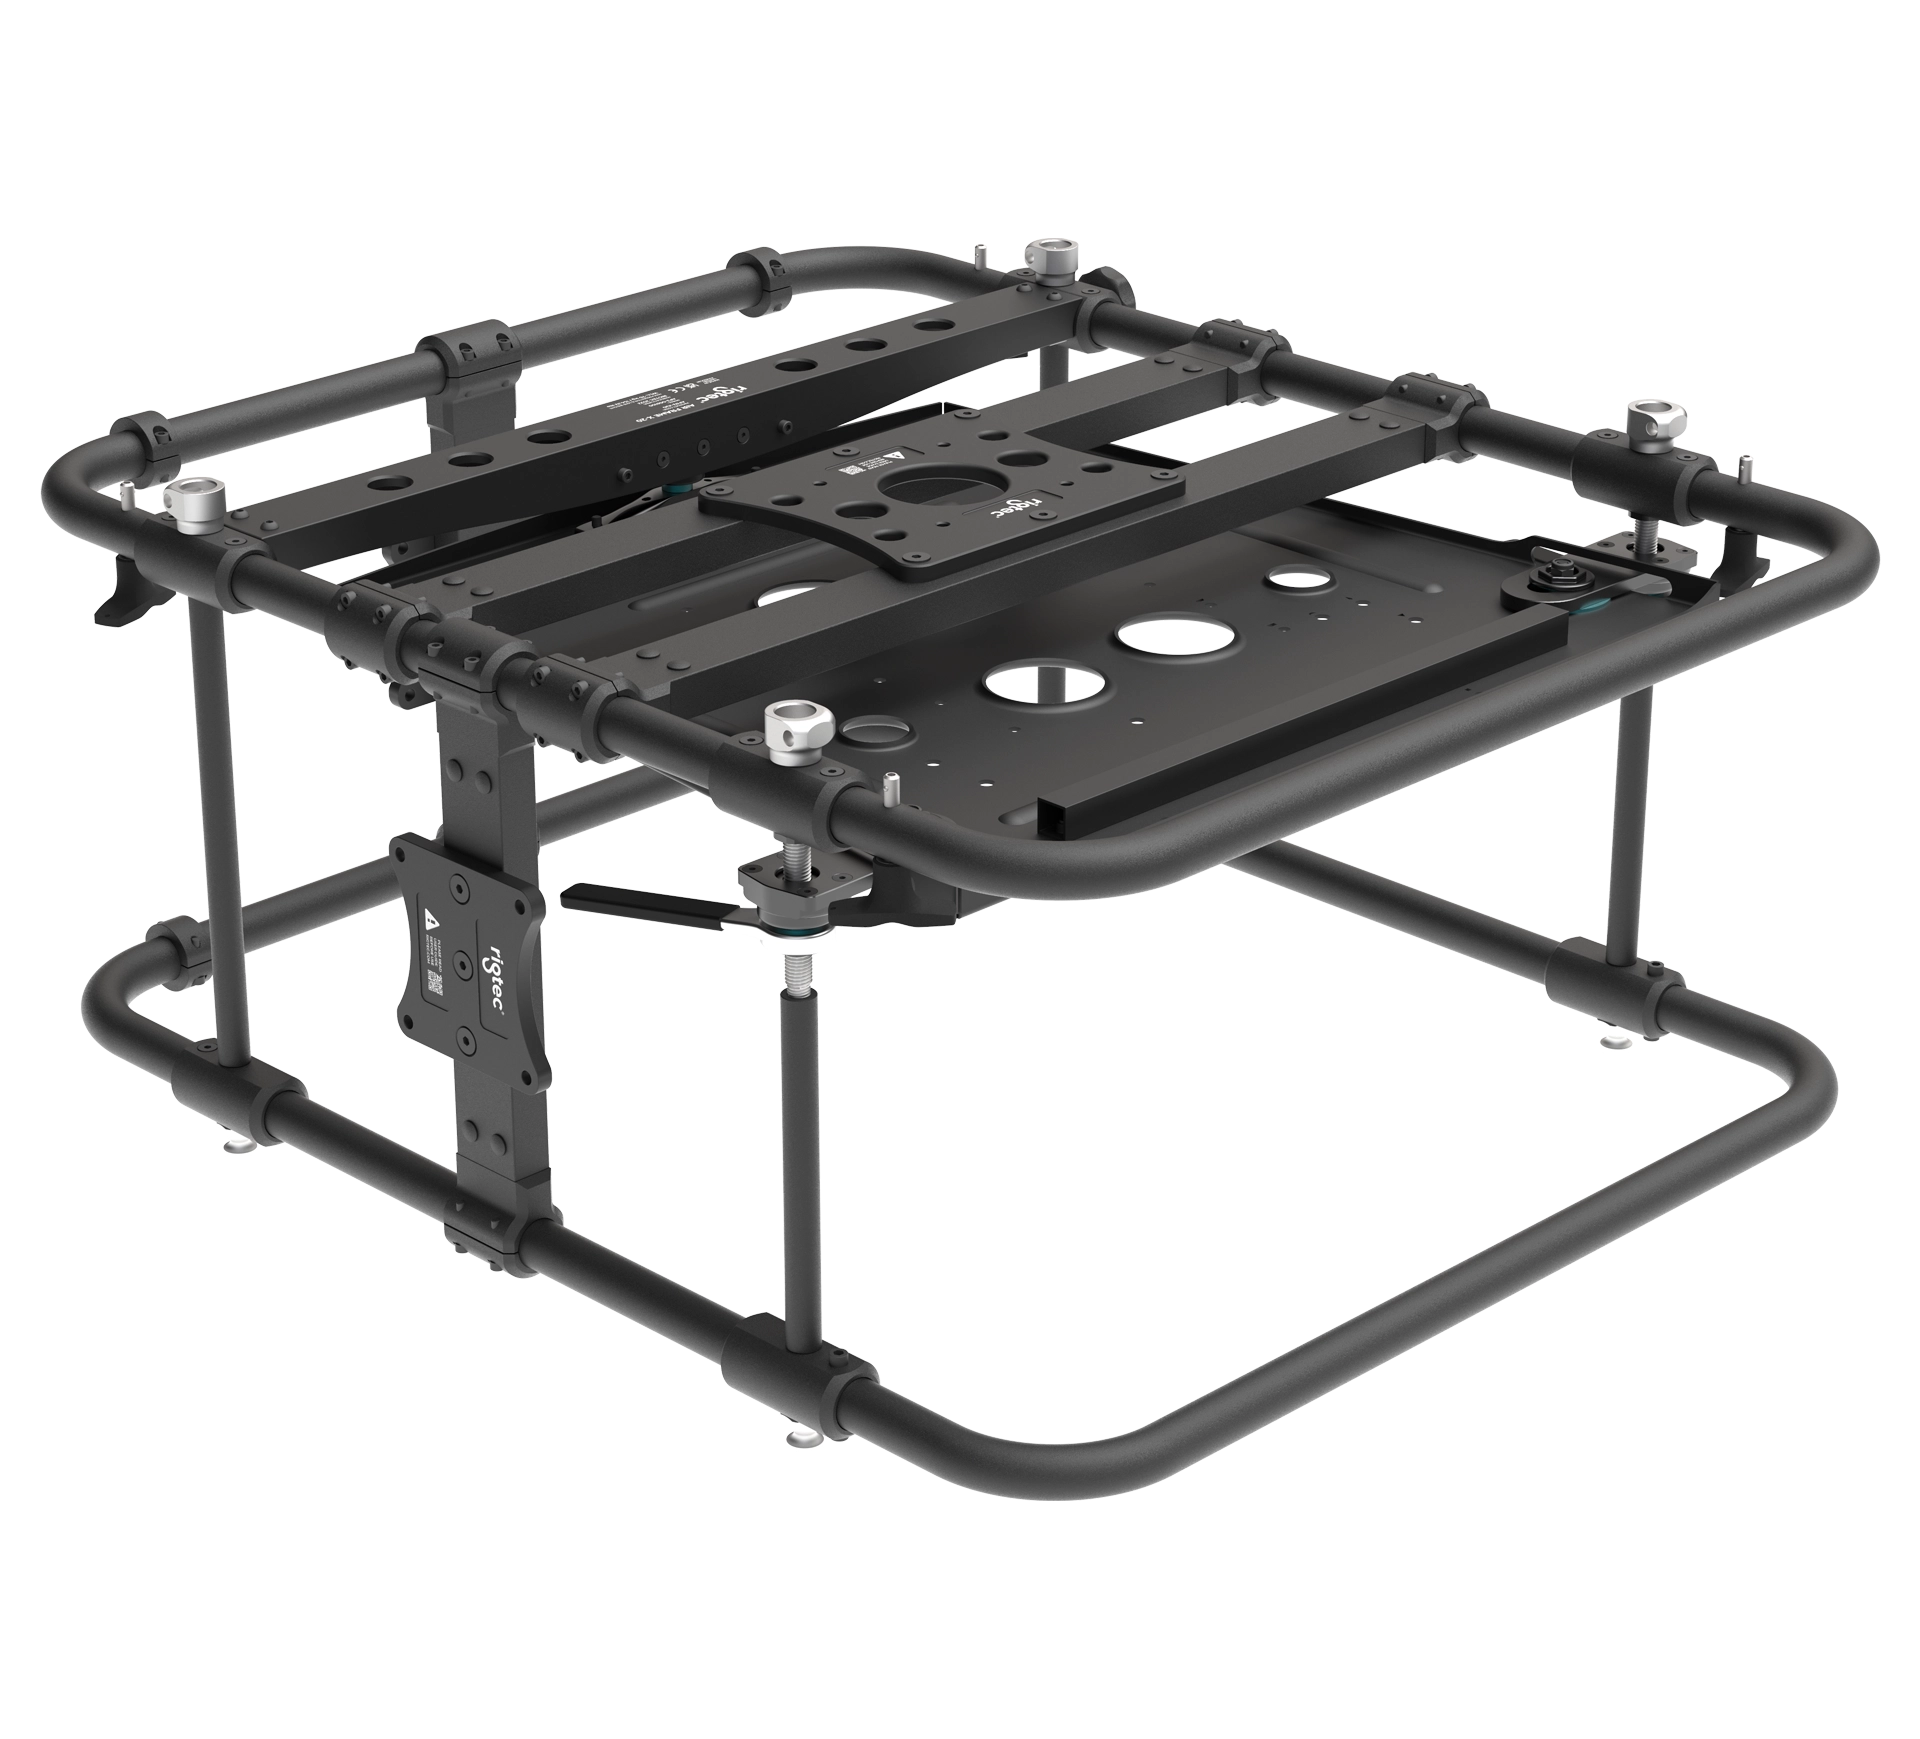 Rigtec Air Frame X20 Projector Rigging Frame